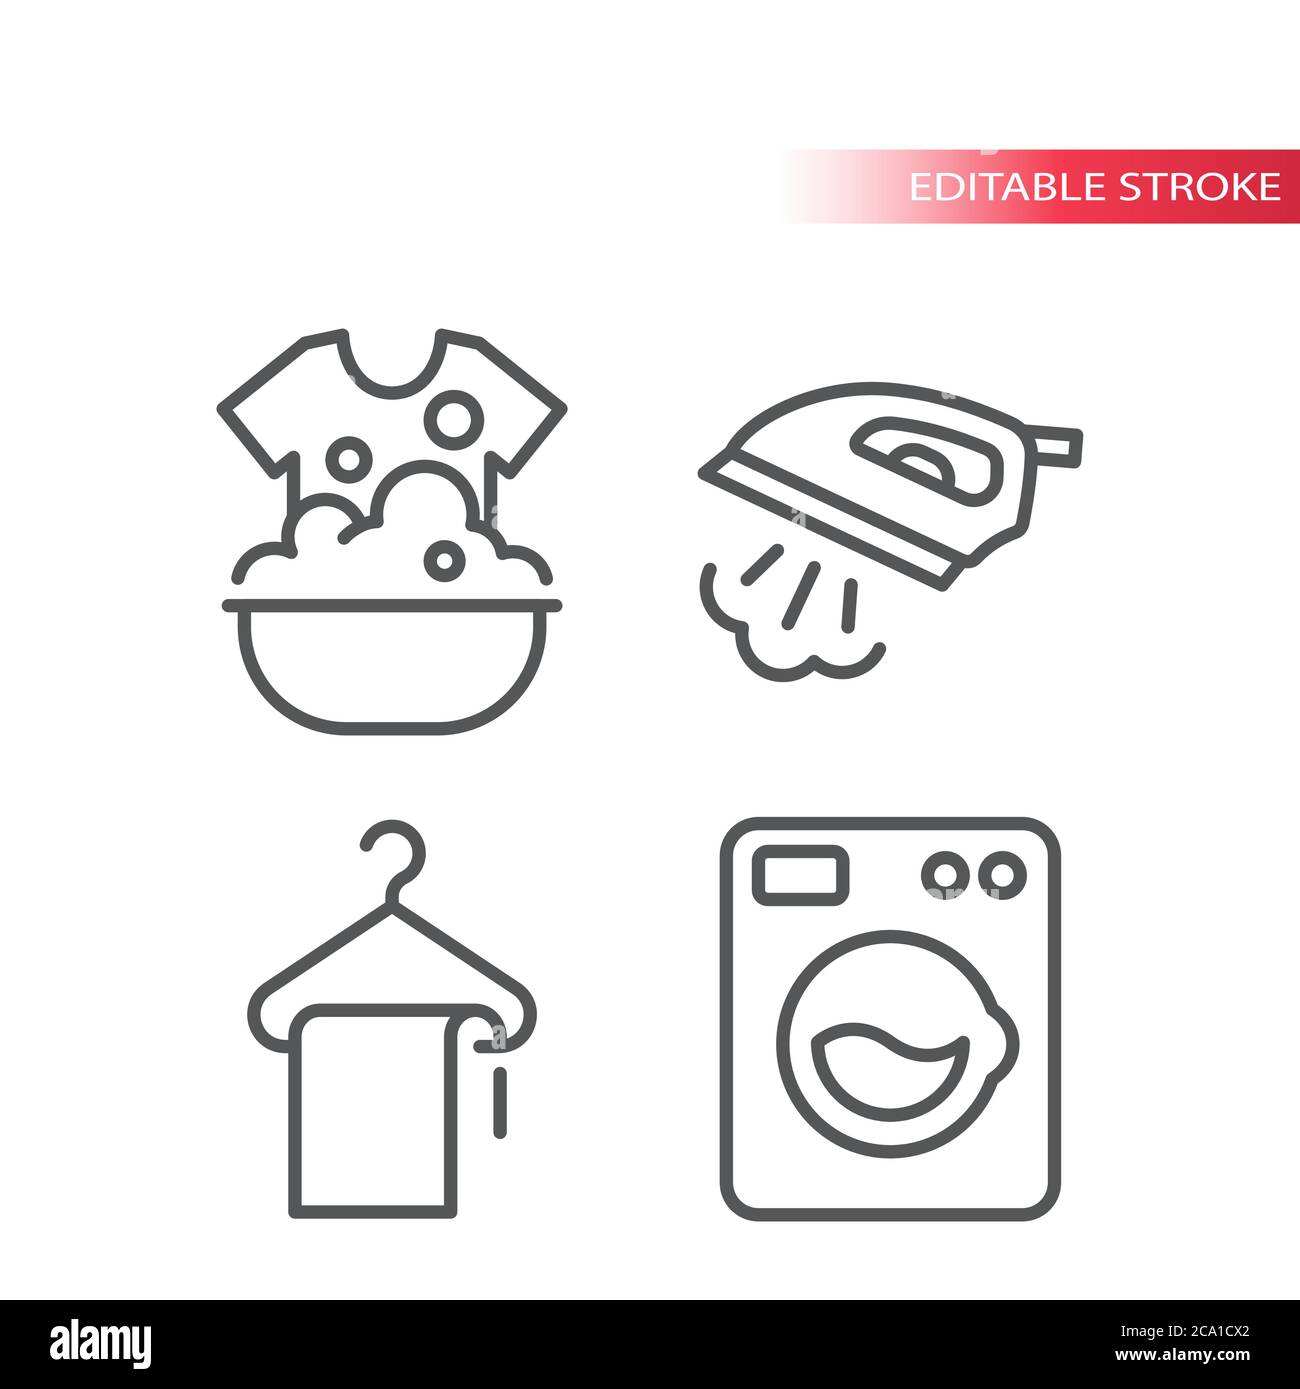 Laundry service thin line icon set. Iron with steam, dry cleaning, washing machine symbols. Outline, editable stroke icons. Stock Vector